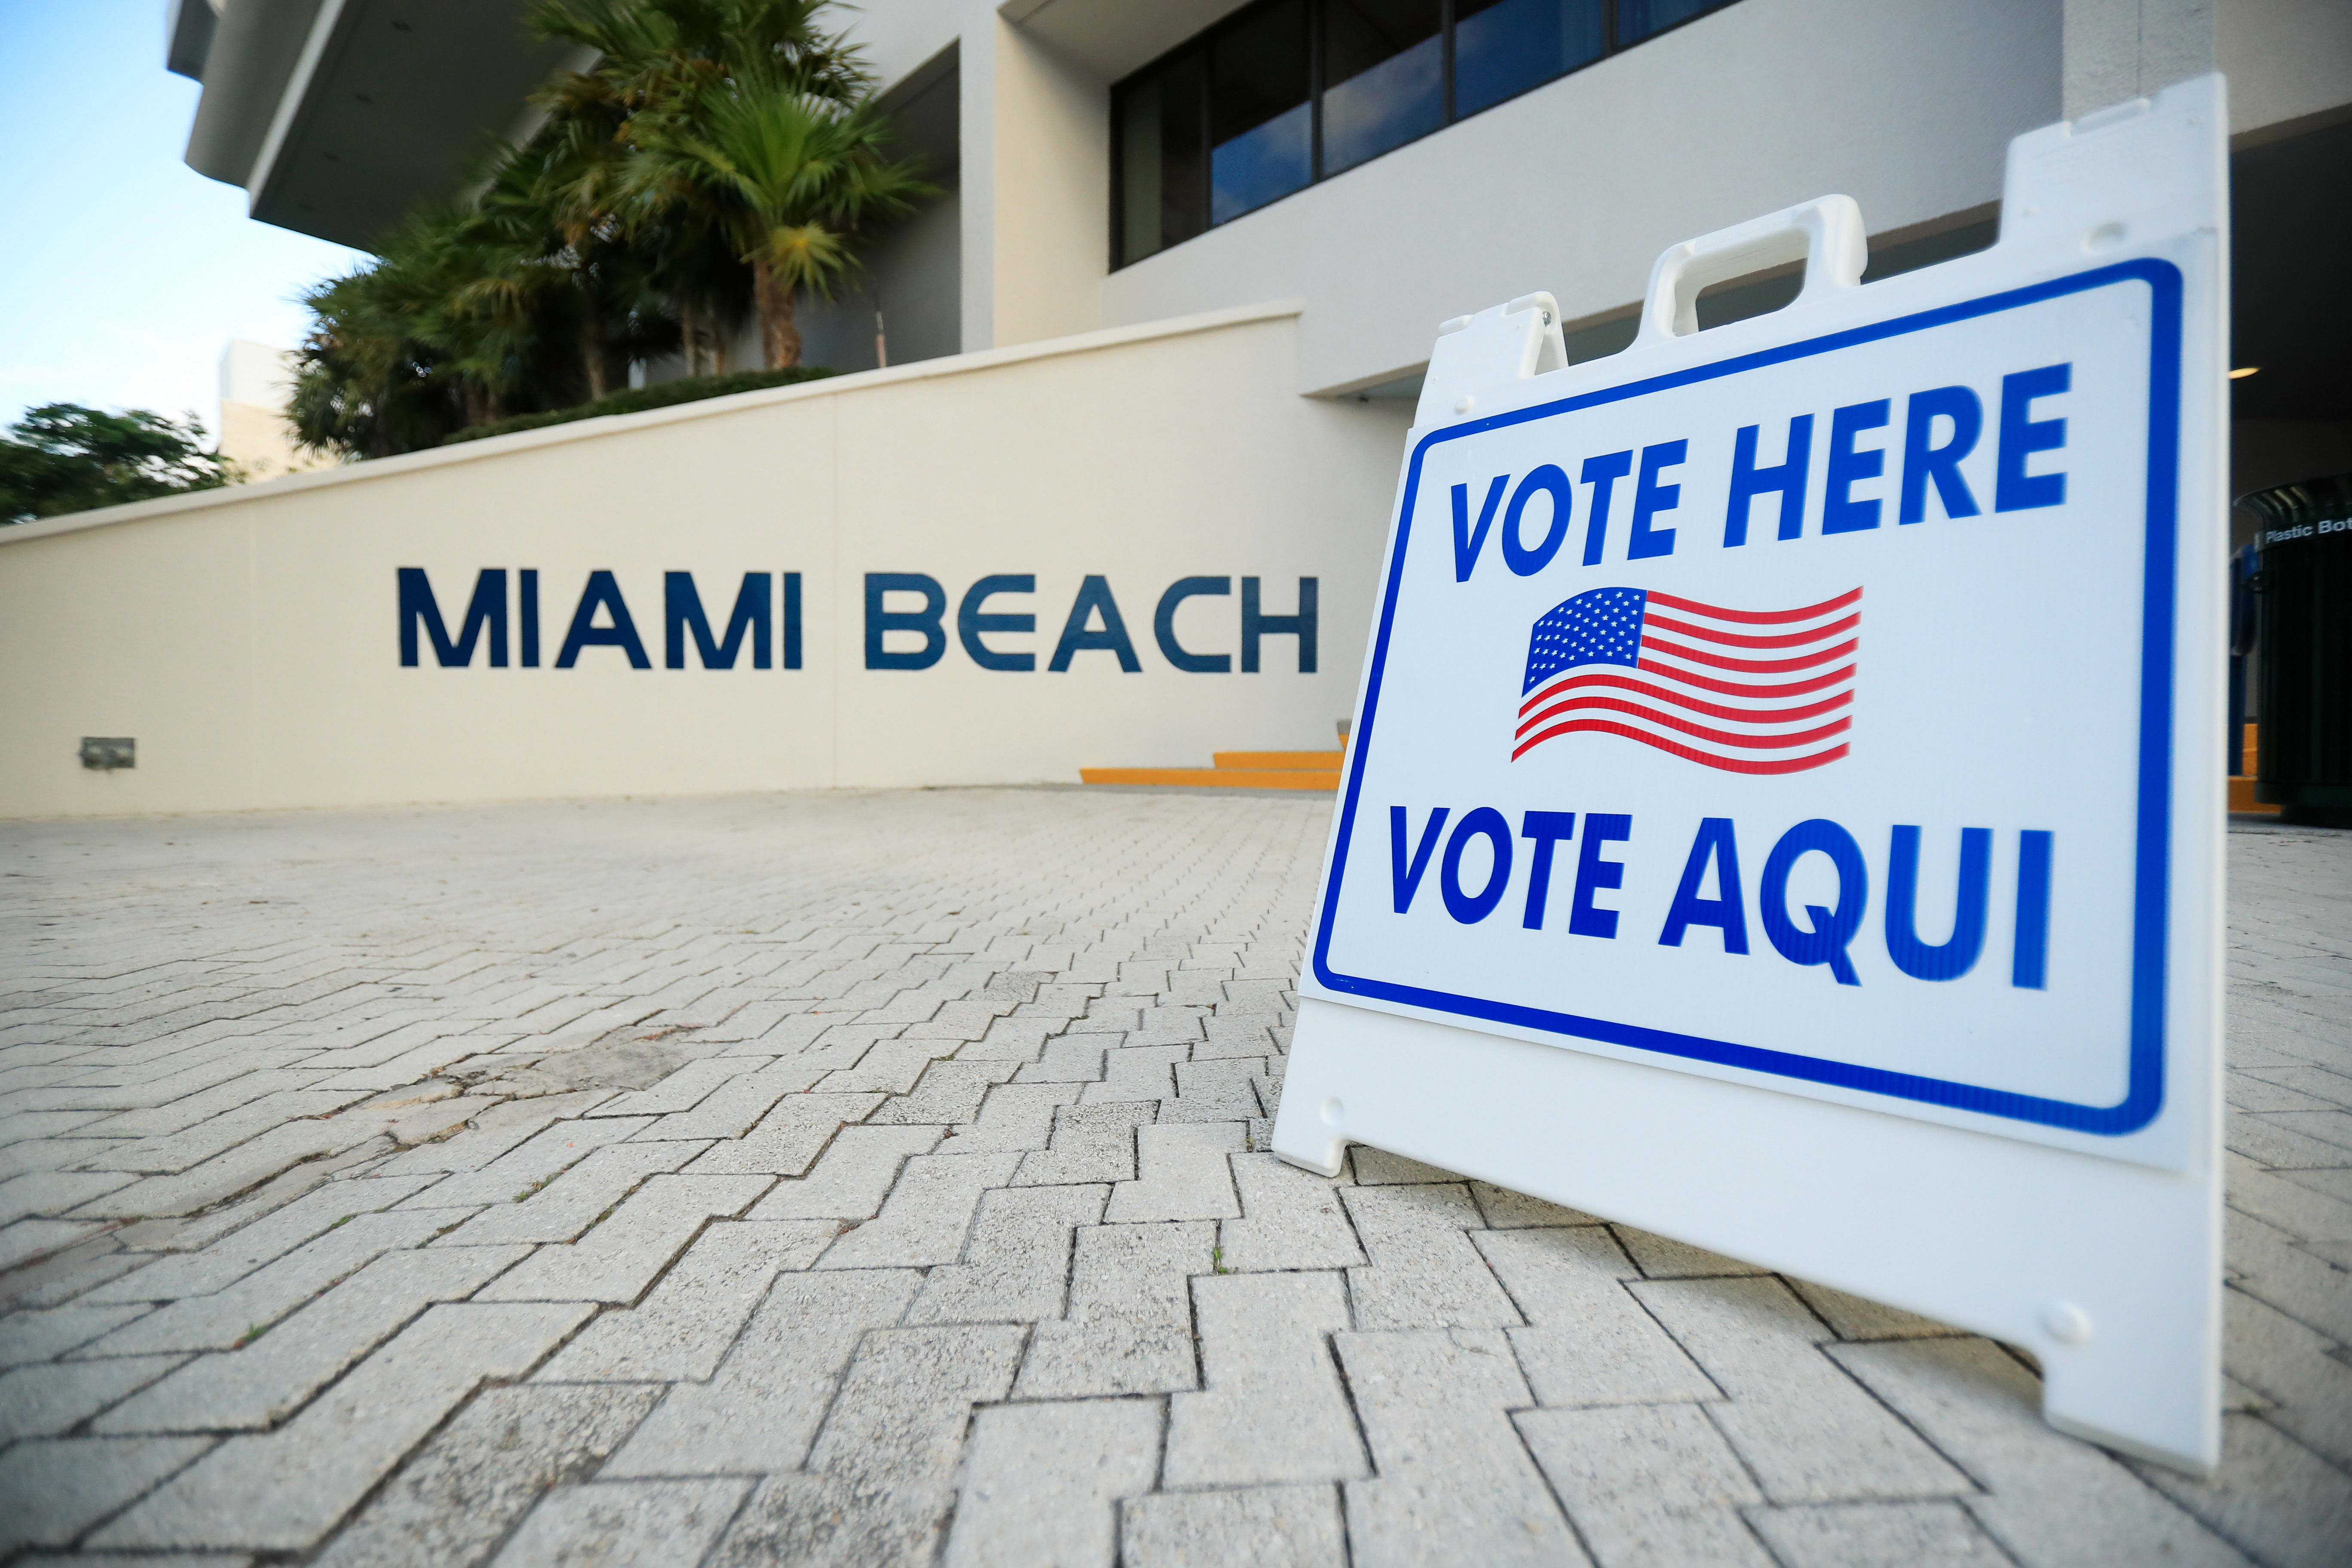 A “vote here” sign seen in Miami Beach, Florida.